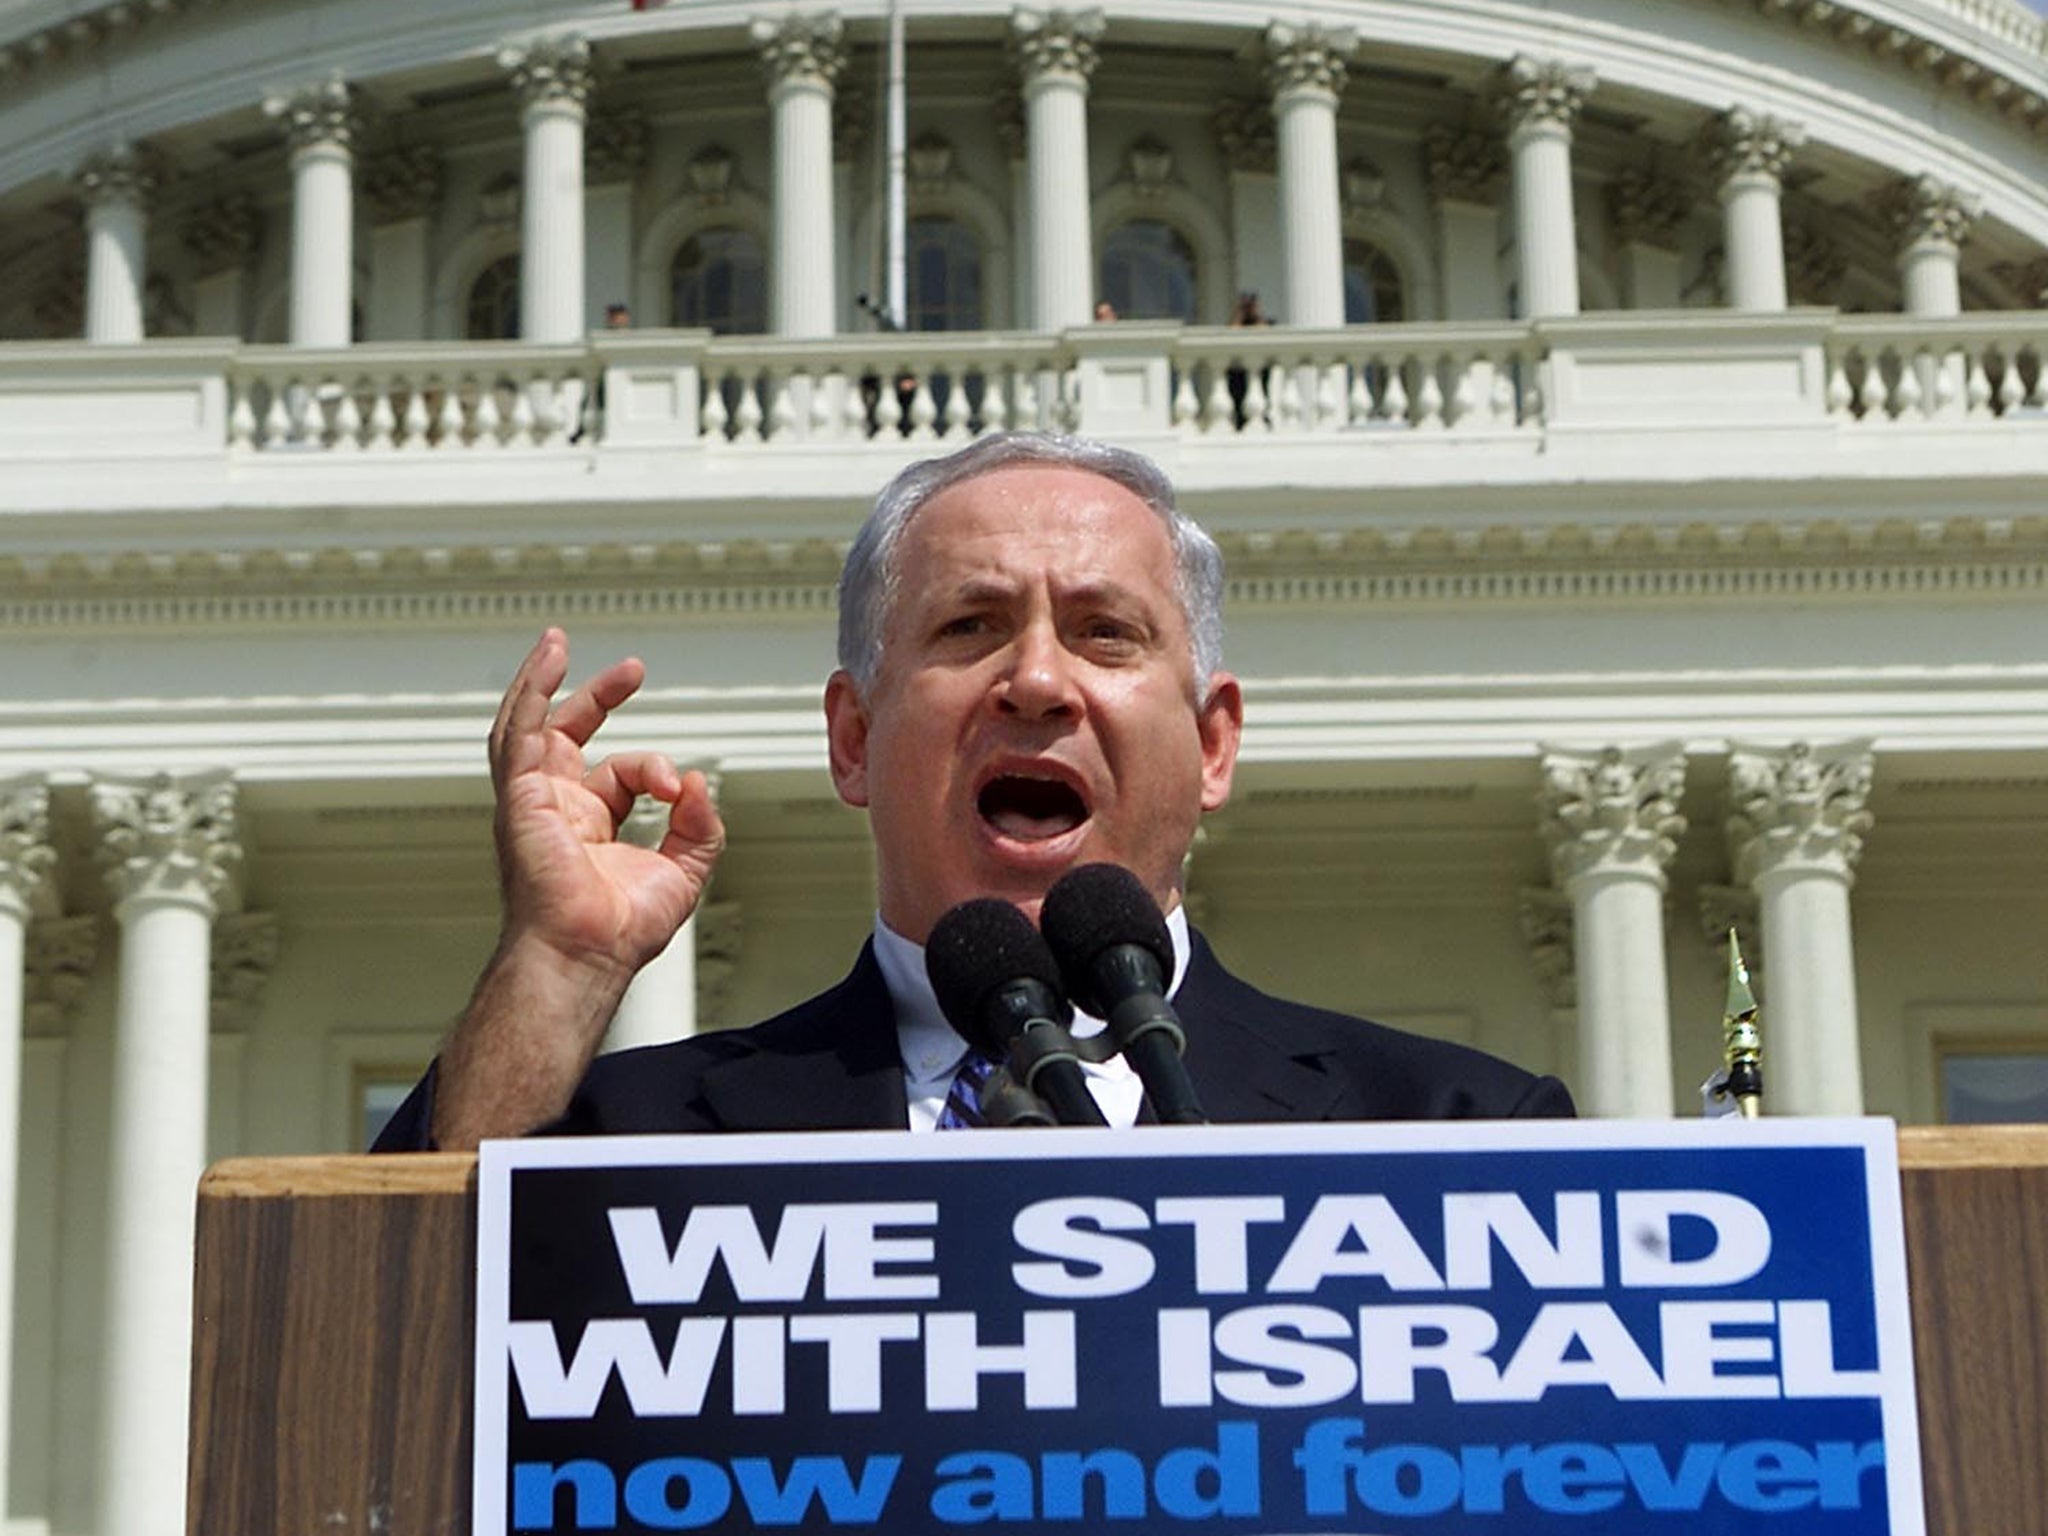 Benjamin Netanyahu, pictured at a pro-Israel rally in Washington in 2002, is accused of jeopardising relations with the US